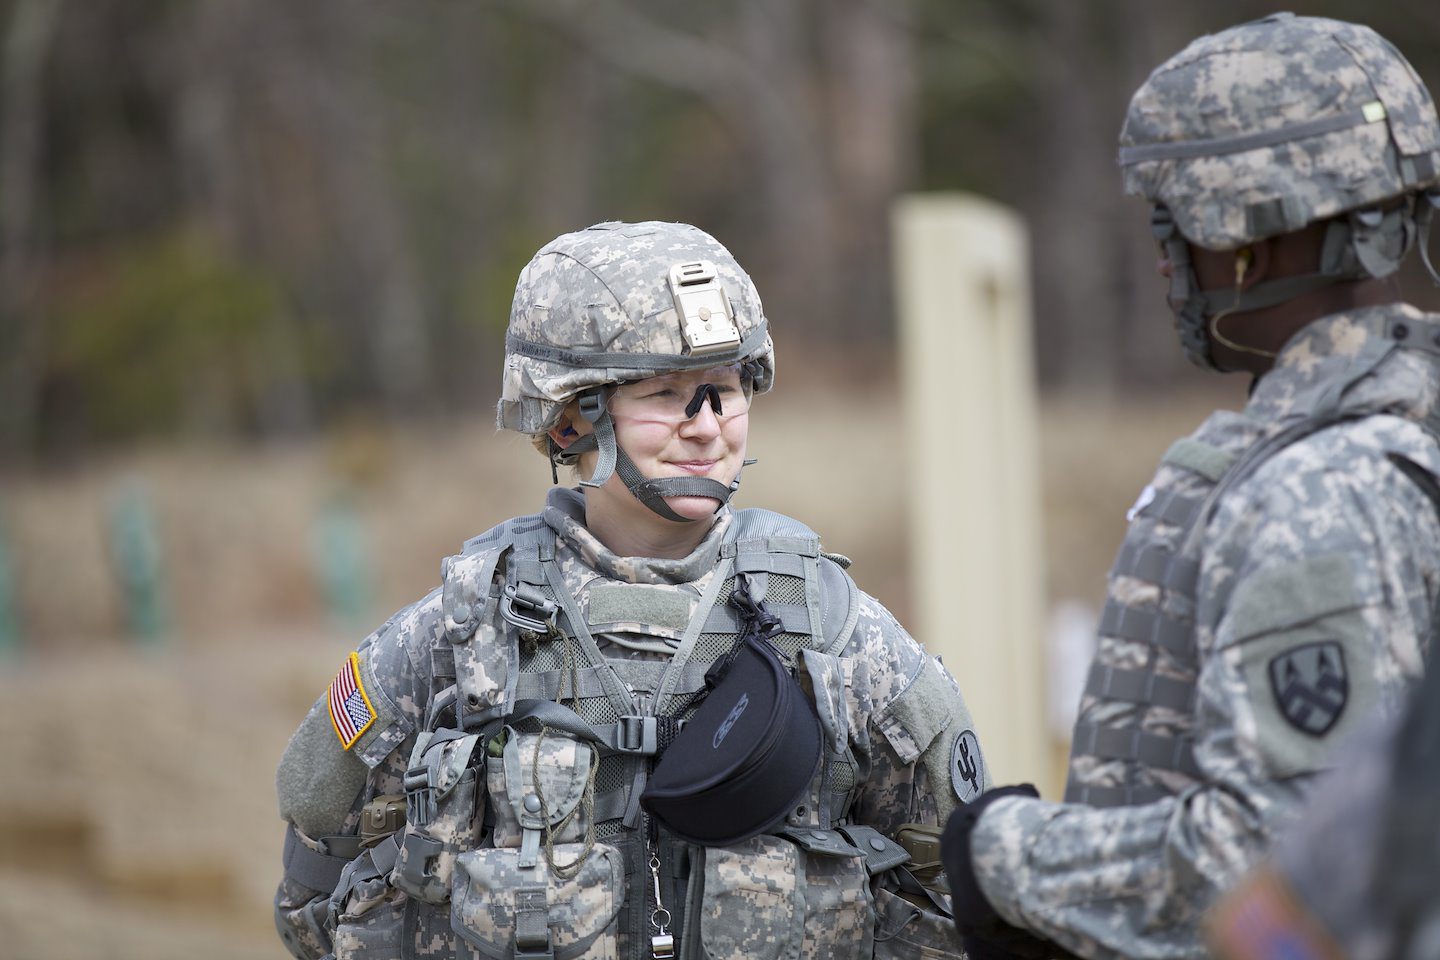 Sgt. Jessica Williams, a human resources noncommissioned officer with the 646th Regional Support Group, speaks with Staff Sgt. Cedric Bailey, assigned to the 377th Theater Sustainment Command, during the 377th TSC’s Best Warrior Competition at Fort Devens, Mass. April 14, 2015. The appearance of U.S. Department of Defense (DoD) visual information does not imply or constitute DoD endorsement. 1873771. Public domain.